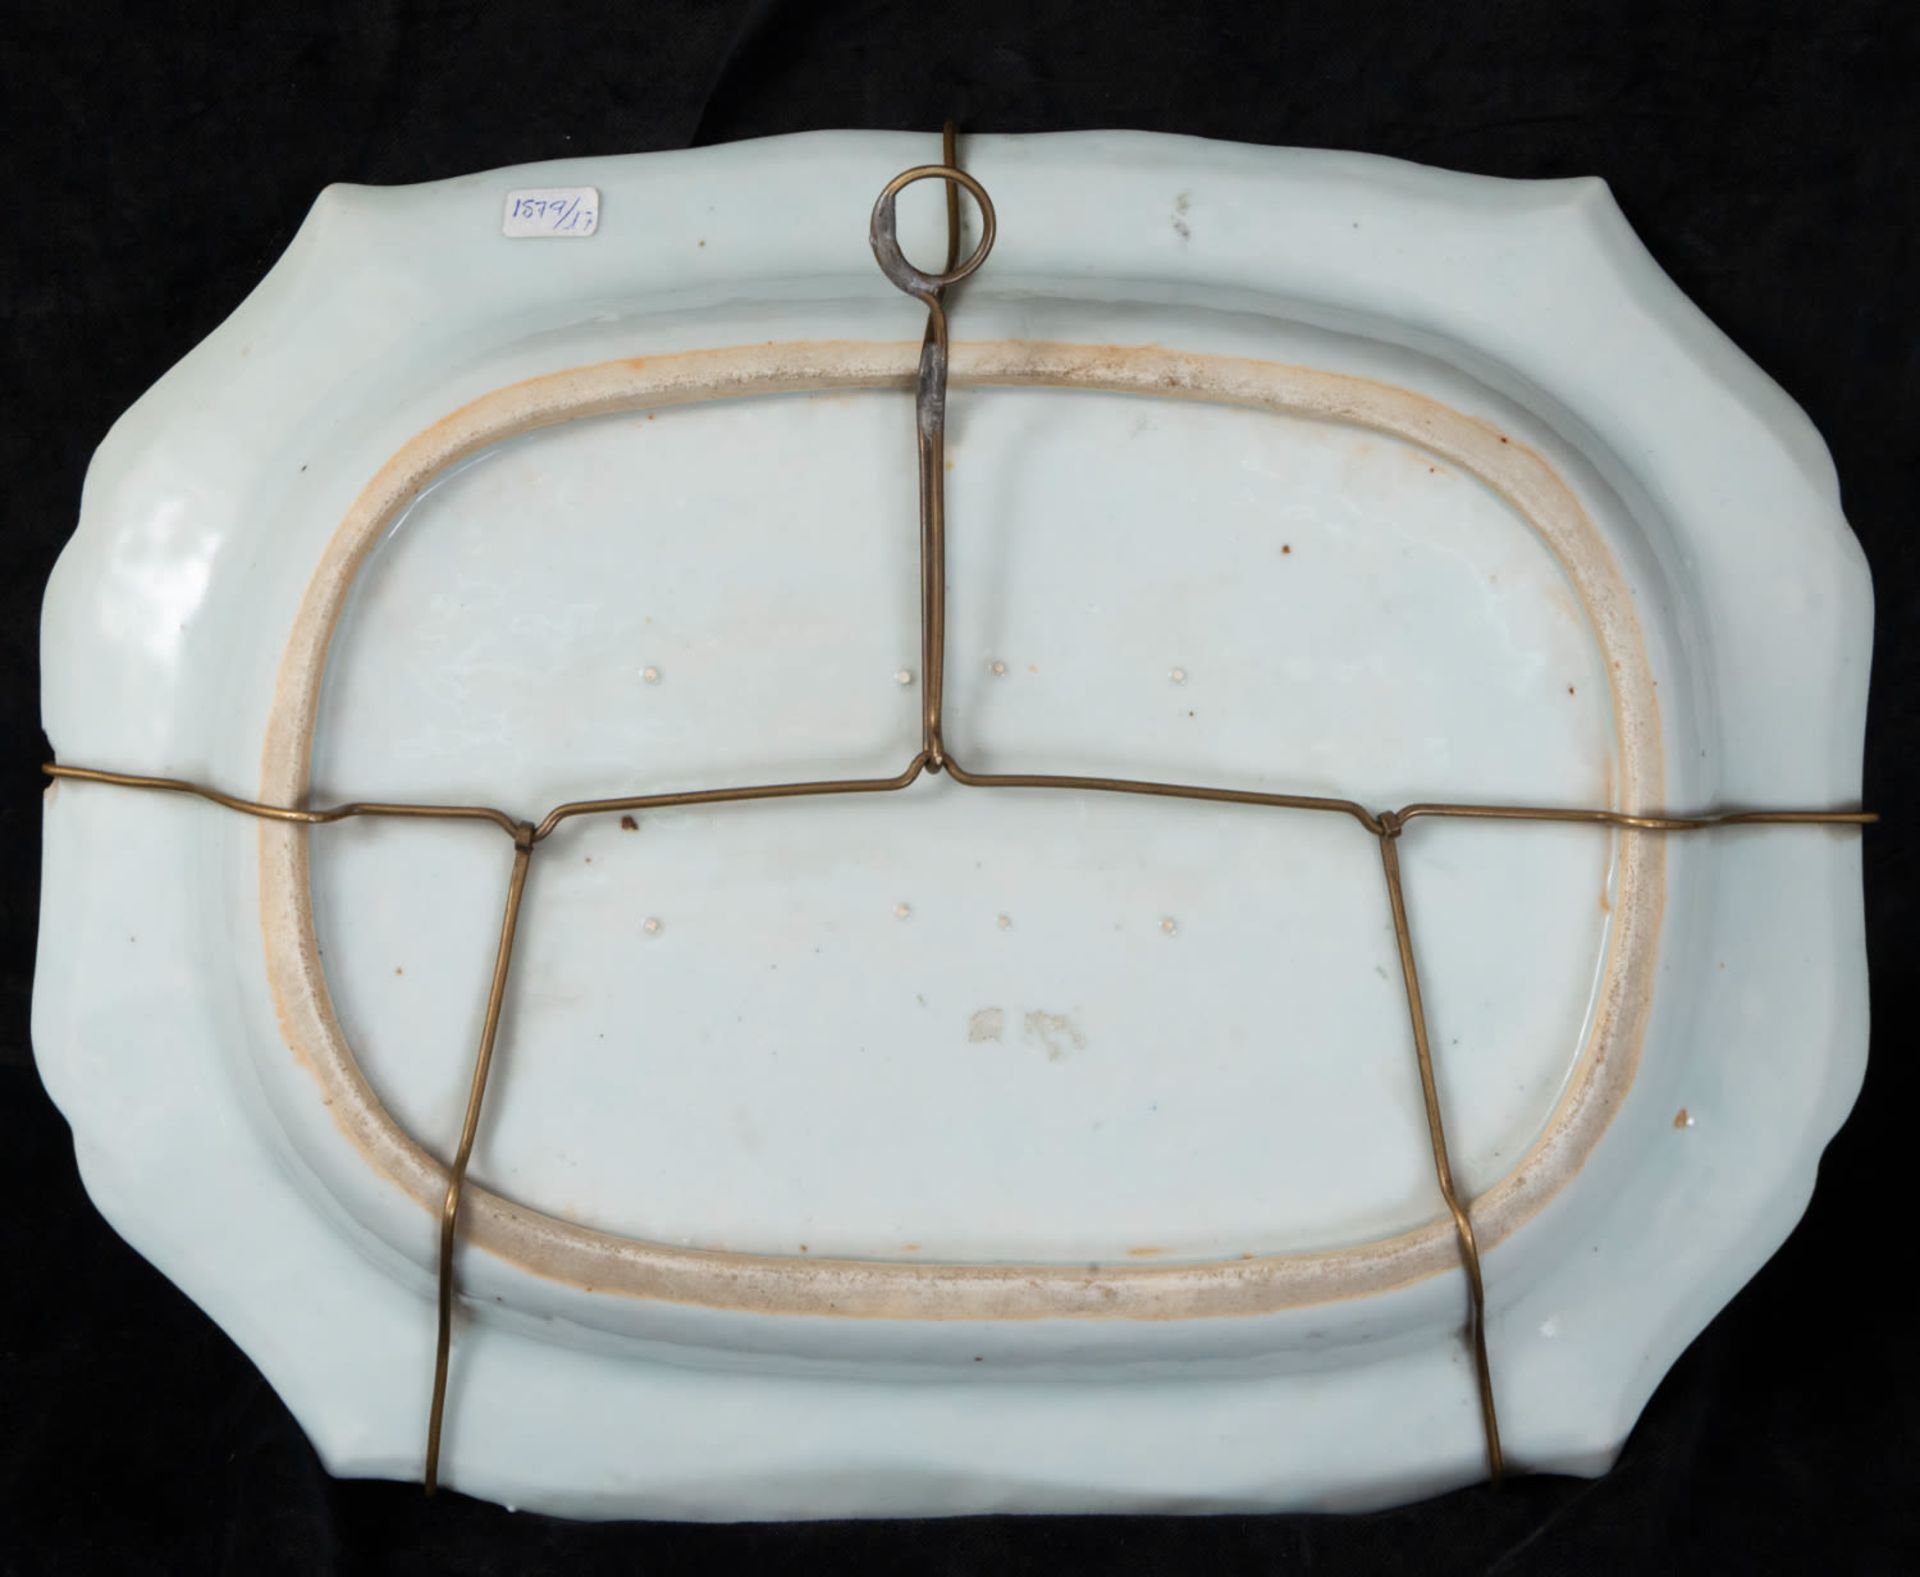 Tray with Chinese characters from the Rosa series, 18th century - Image 3 of 3